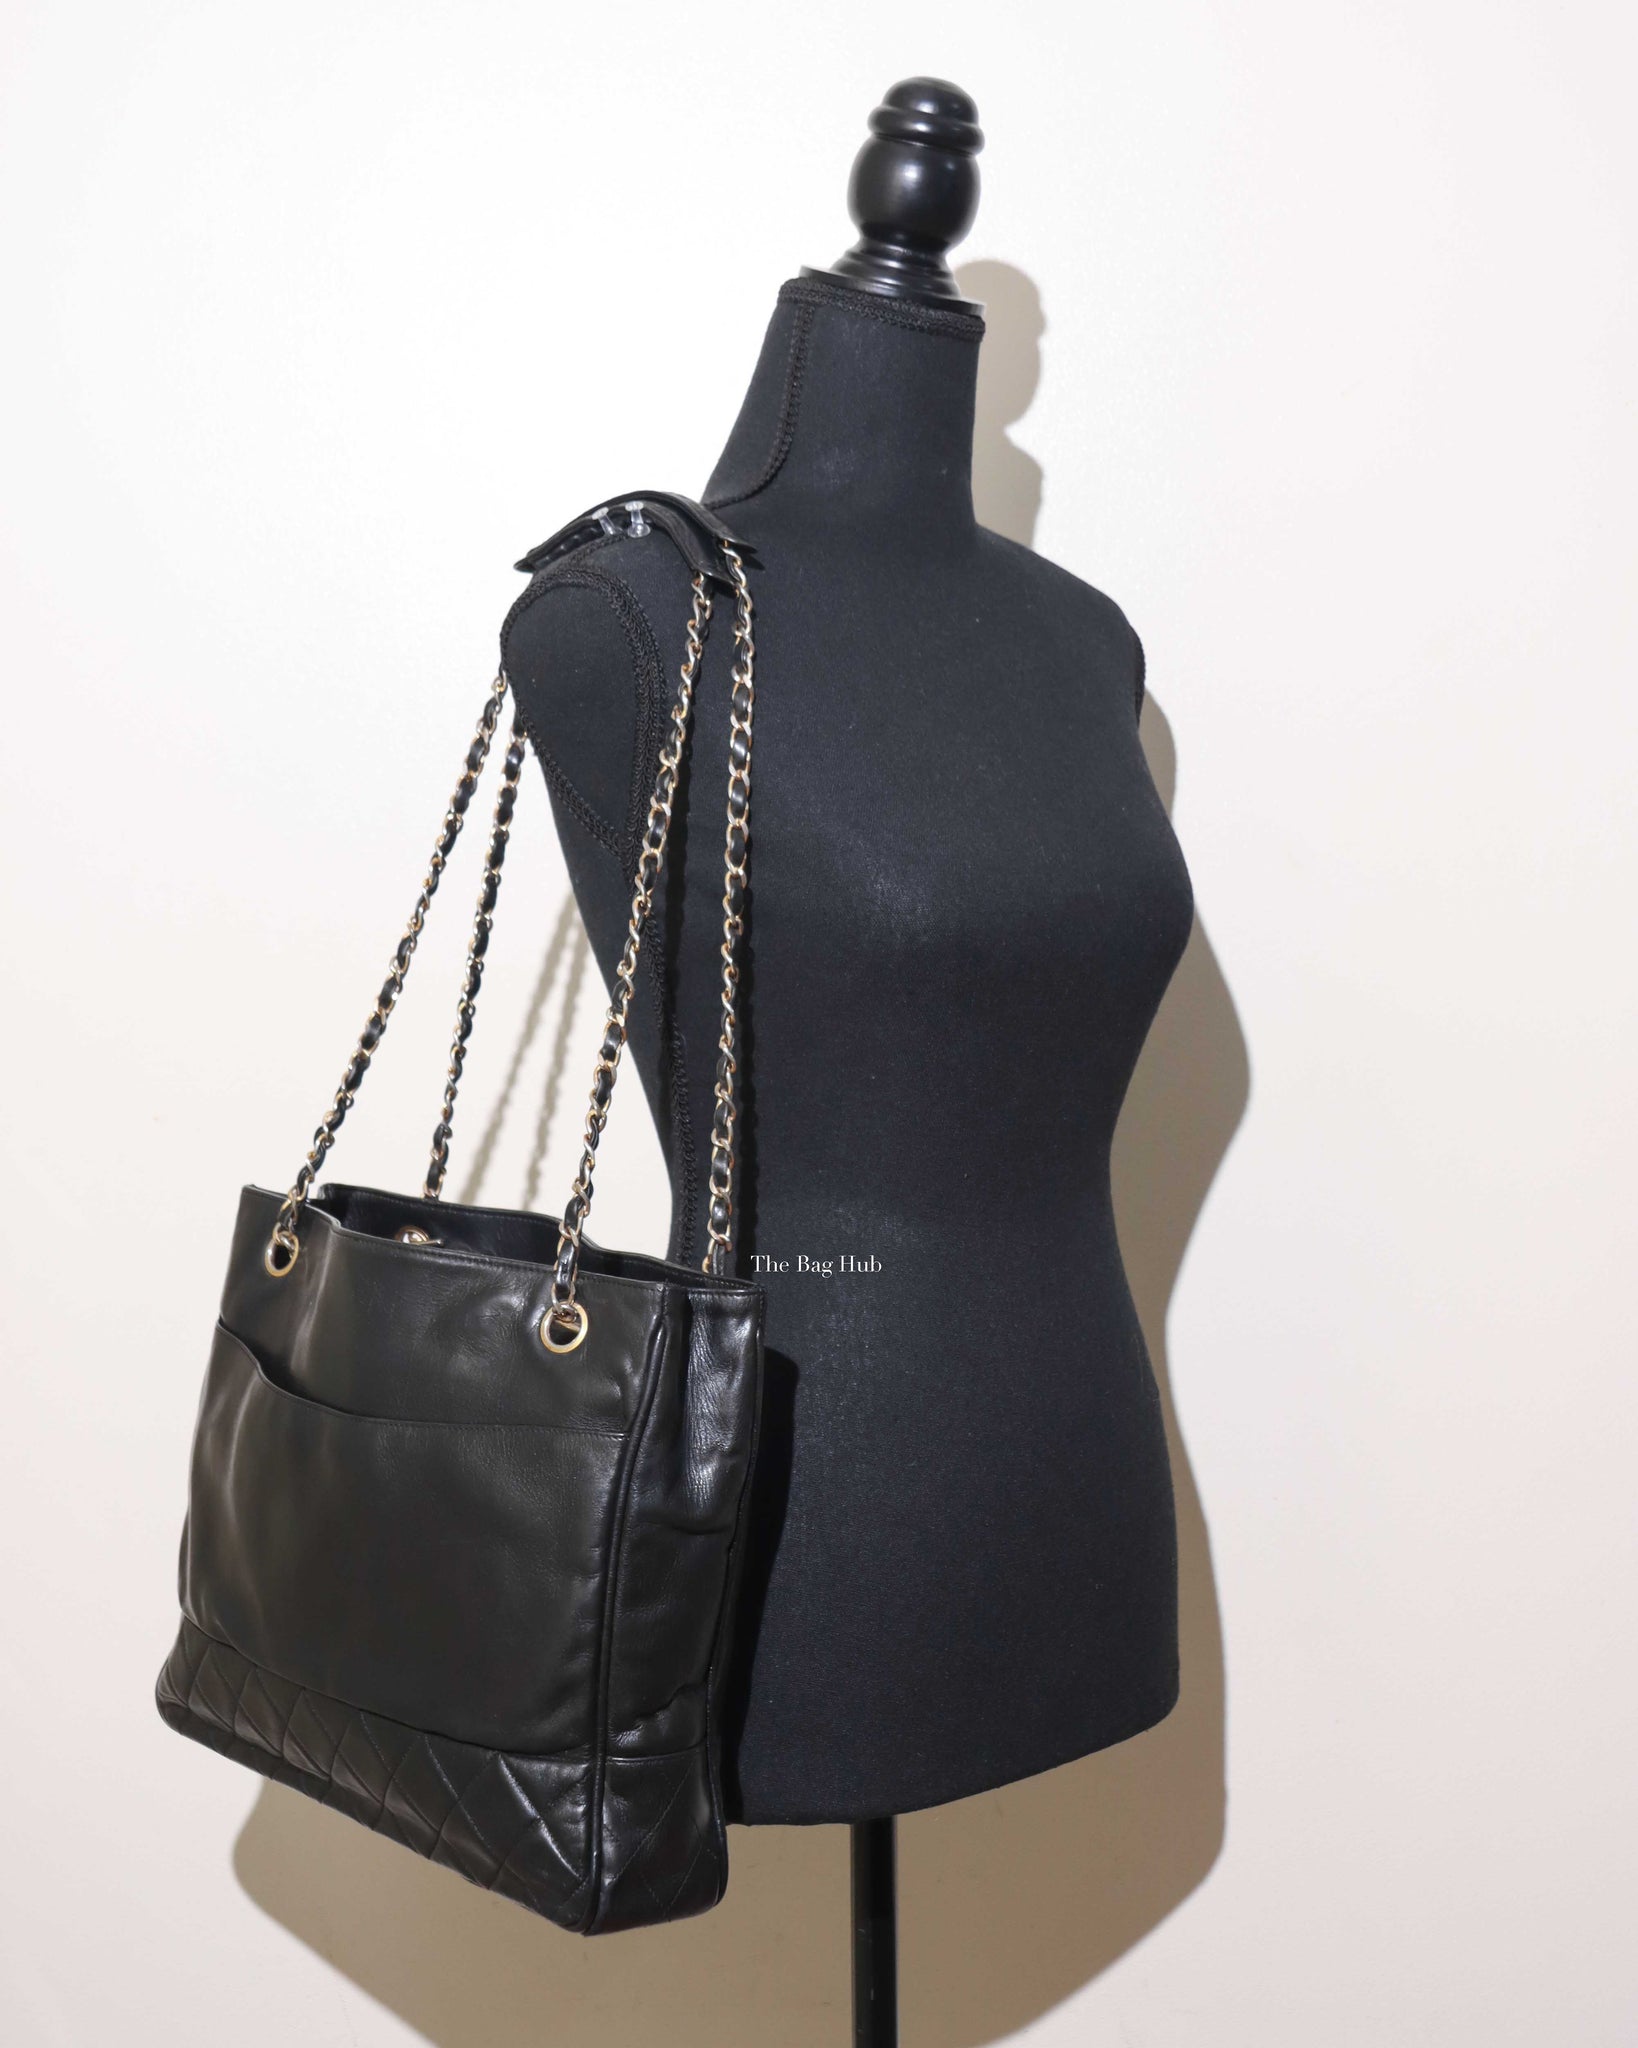 Chanel Black Lambskin Vintage Quilted Tote Bag GHW